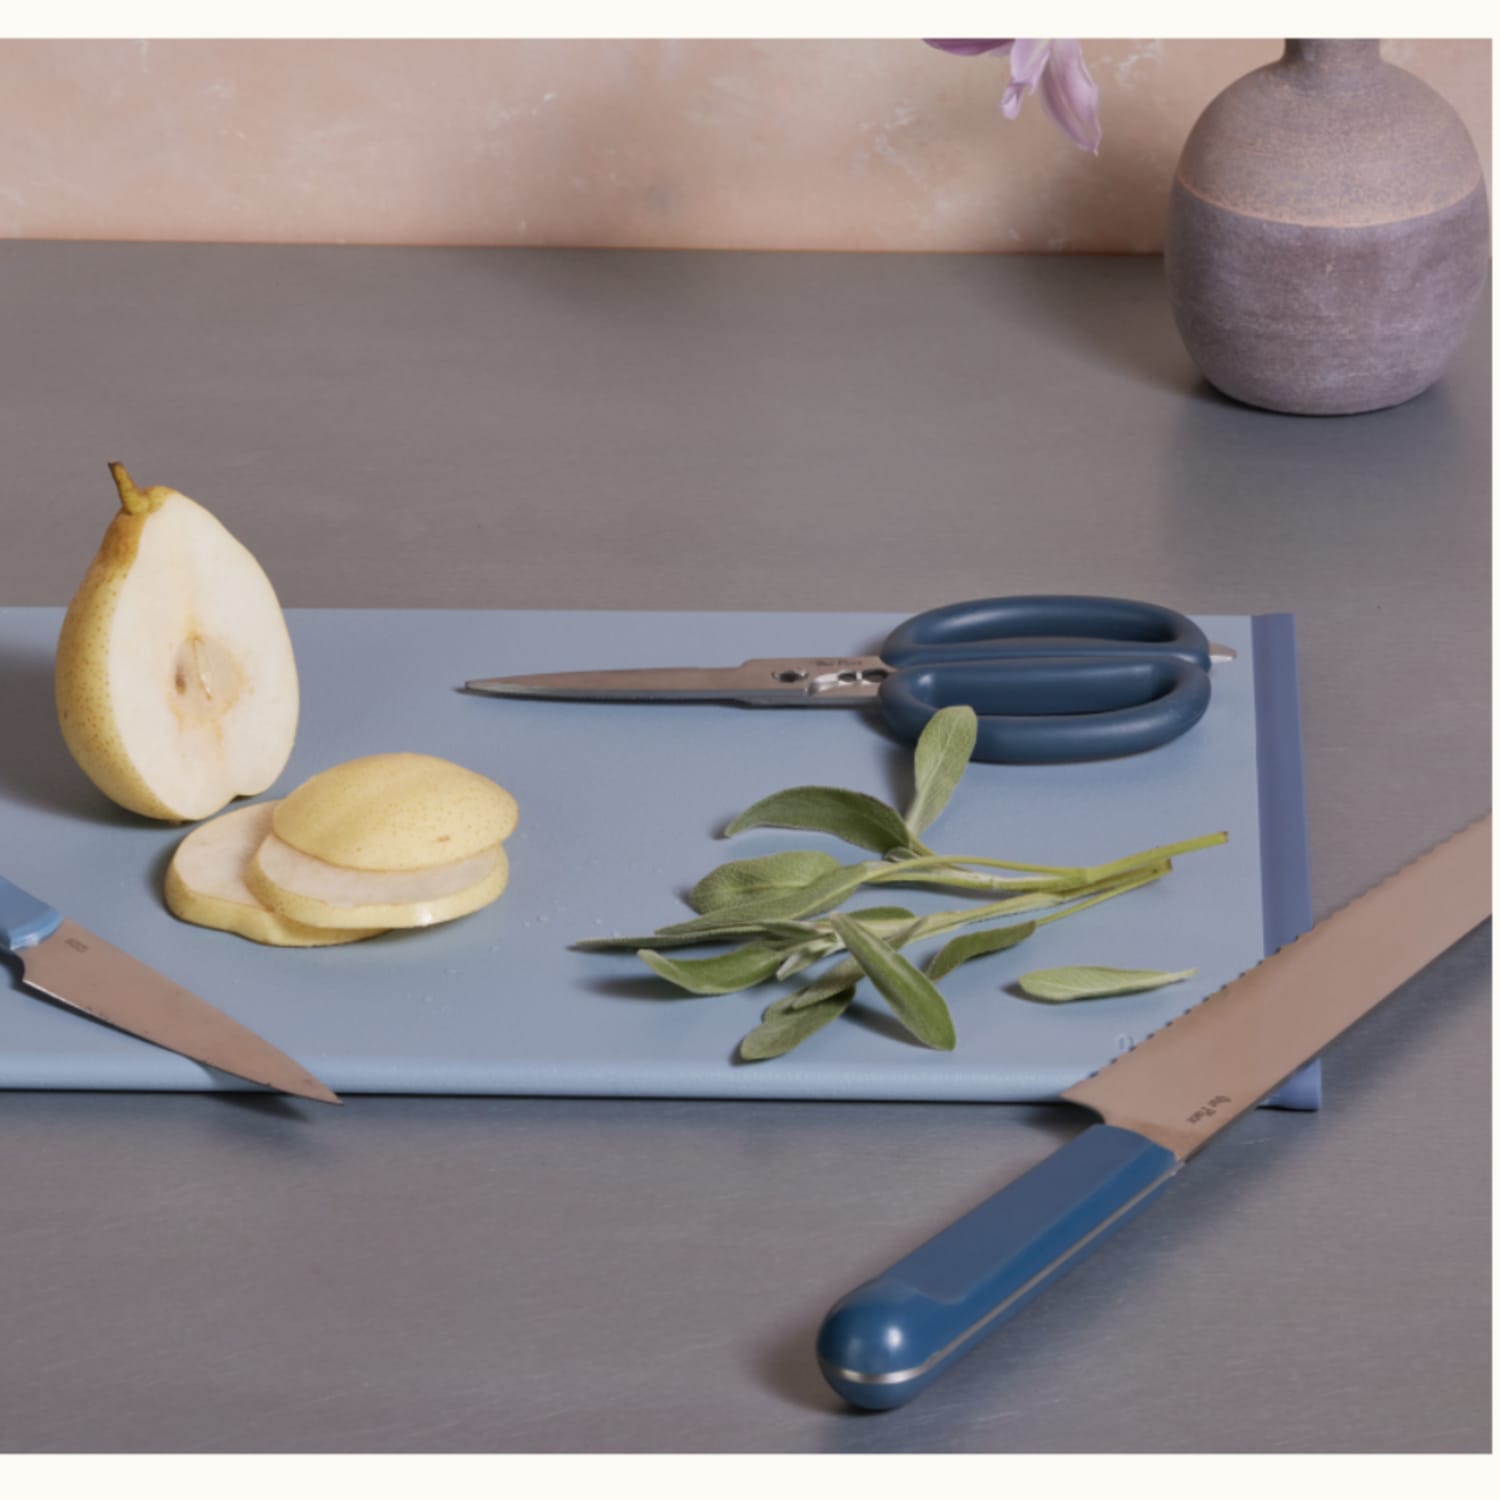 Best Cutting Board: Our Place Daily Board Review 2022